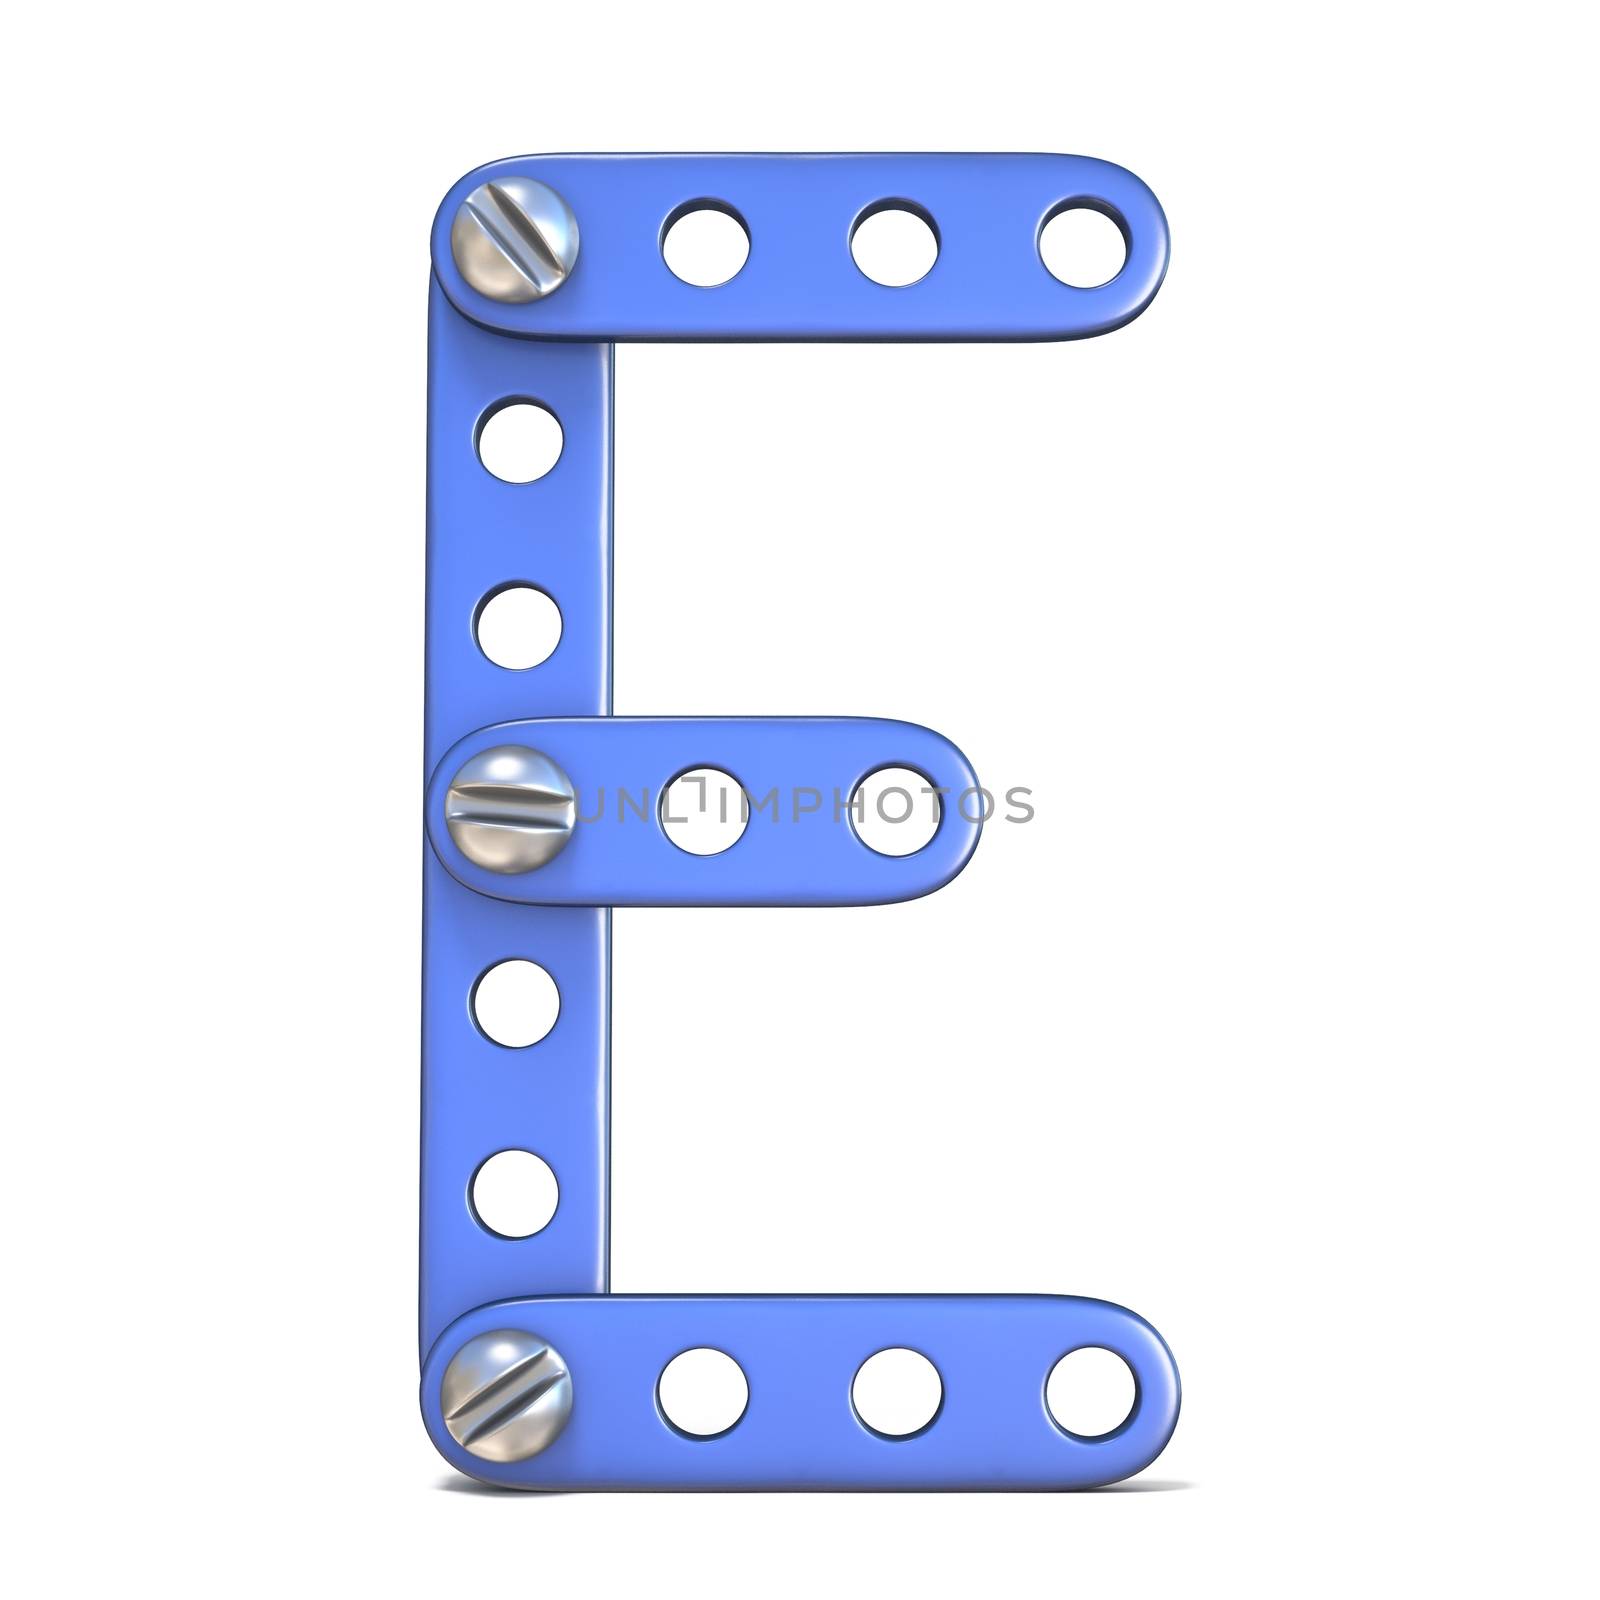 Alphabet made of blue metal constructor toy Letter E 3D render illustration isolated on white background